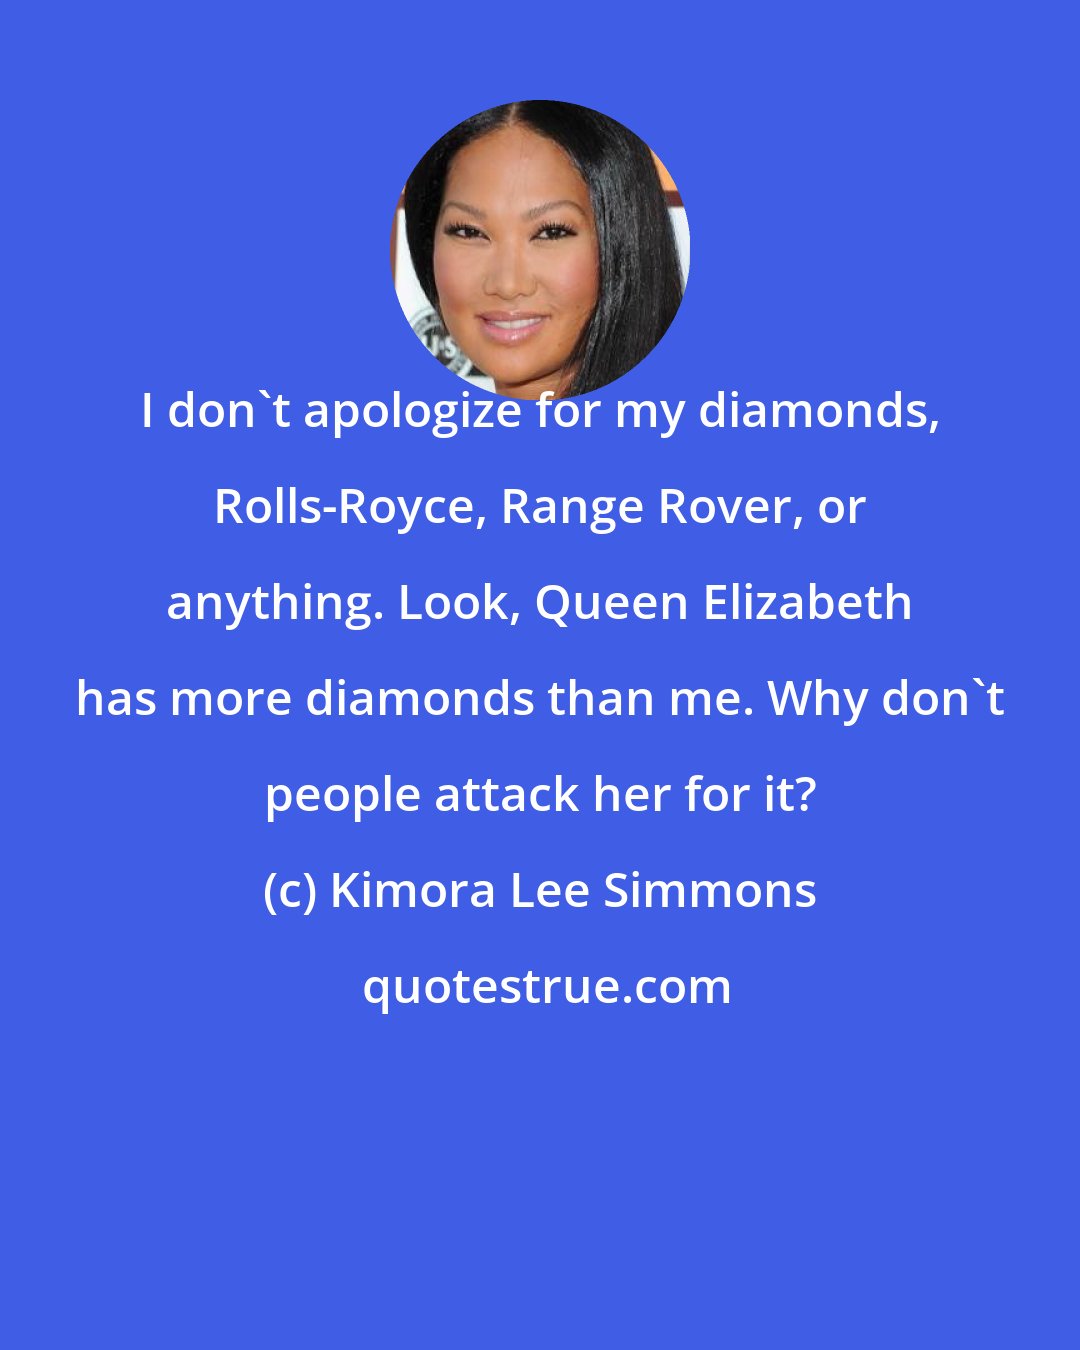 Kimora Lee Simmons: I don't apologize for my diamonds, Rolls-Royce, Range Rover, or anything. Look, Queen Elizabeth has more diamonds than me. Why don't people attack her for it?